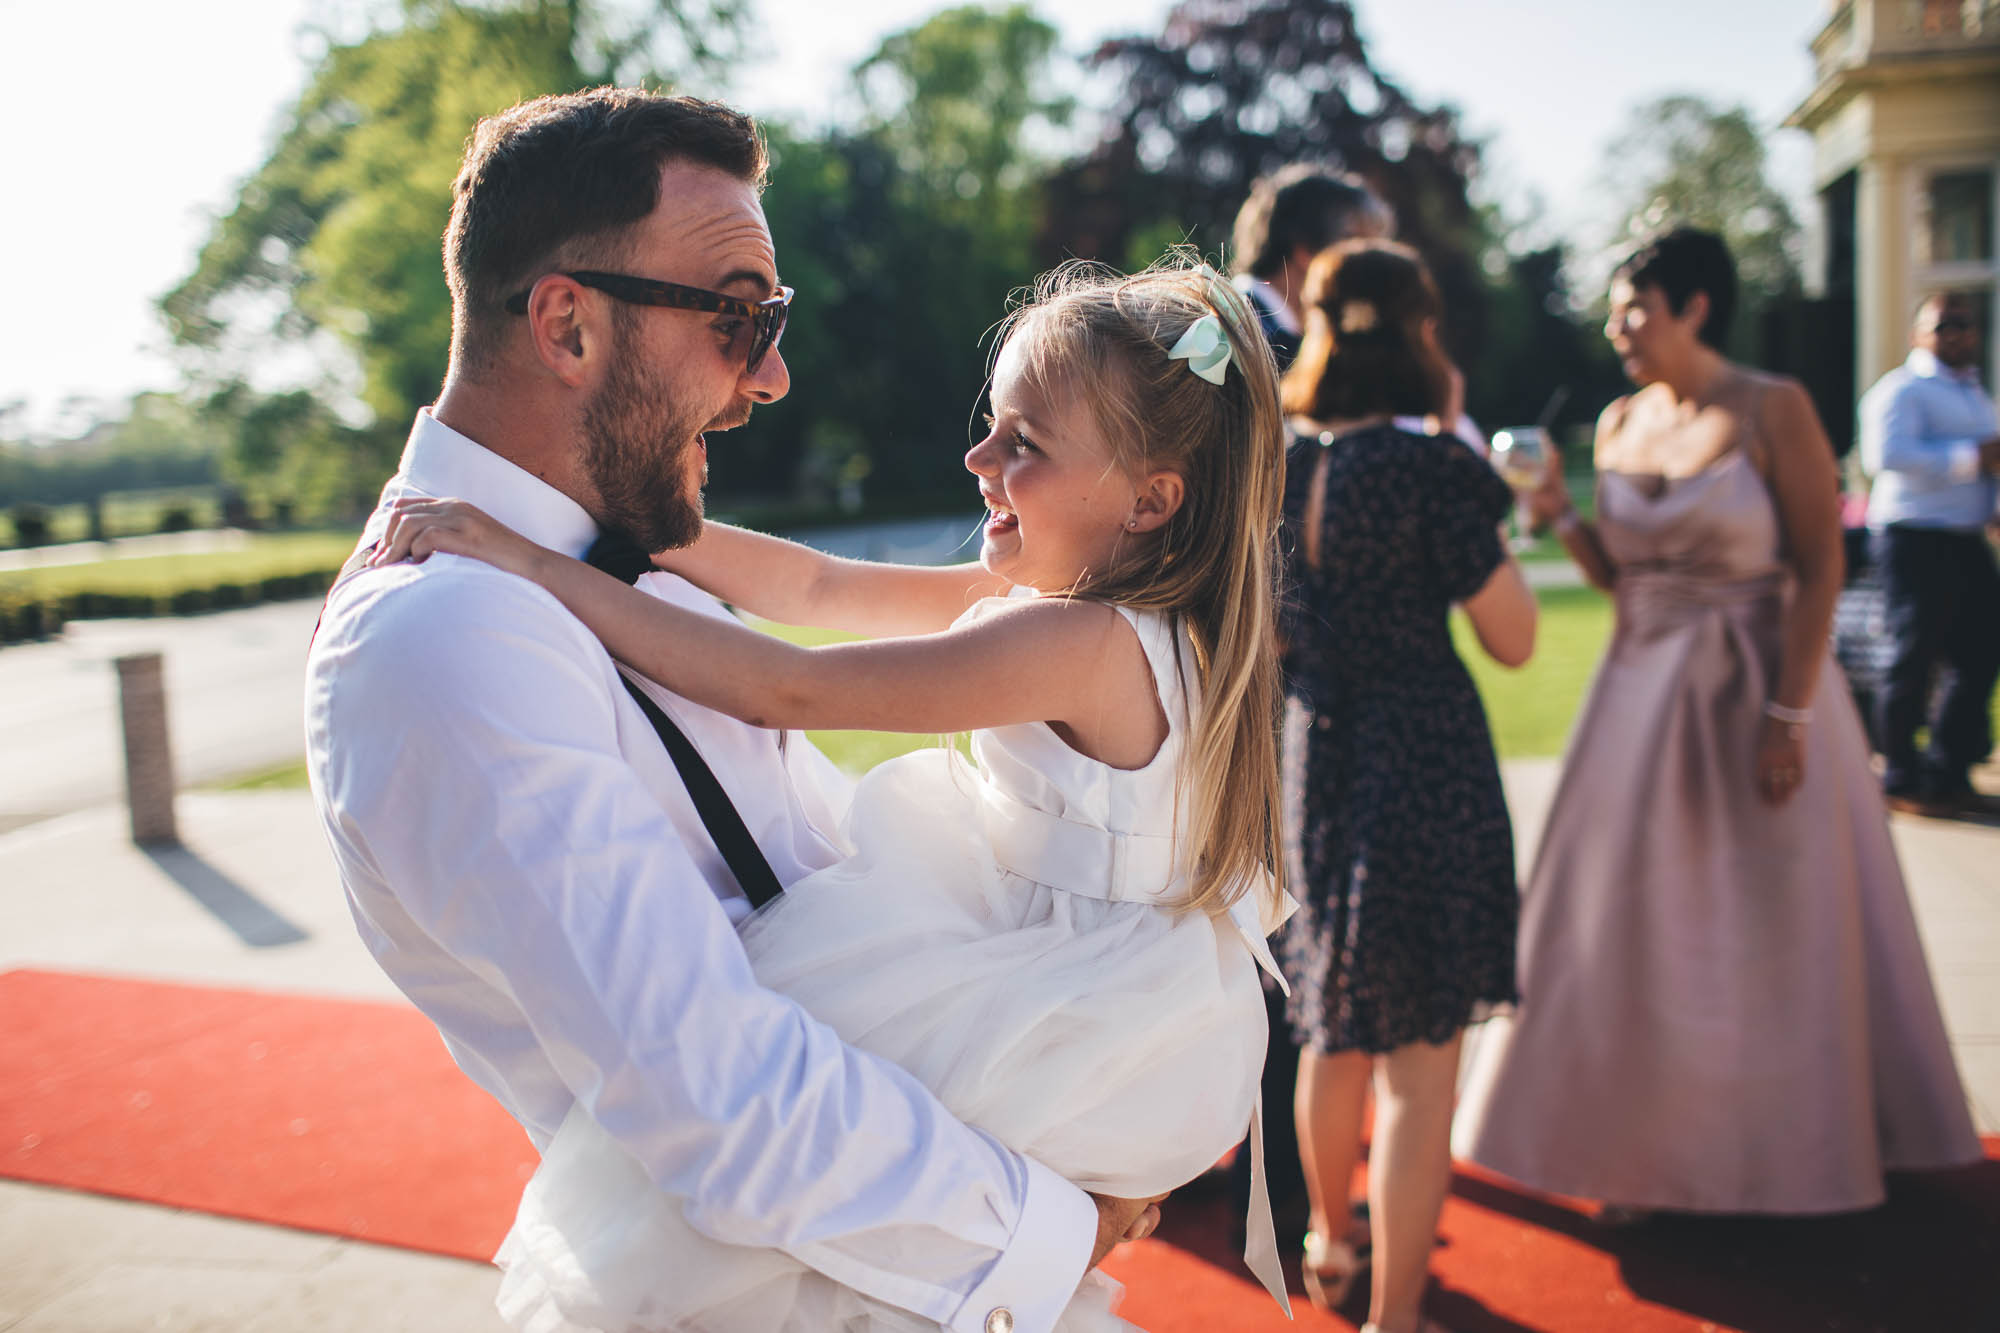 Groom picks up flower girl and makes her laugh outside wedding venue as sun is going down